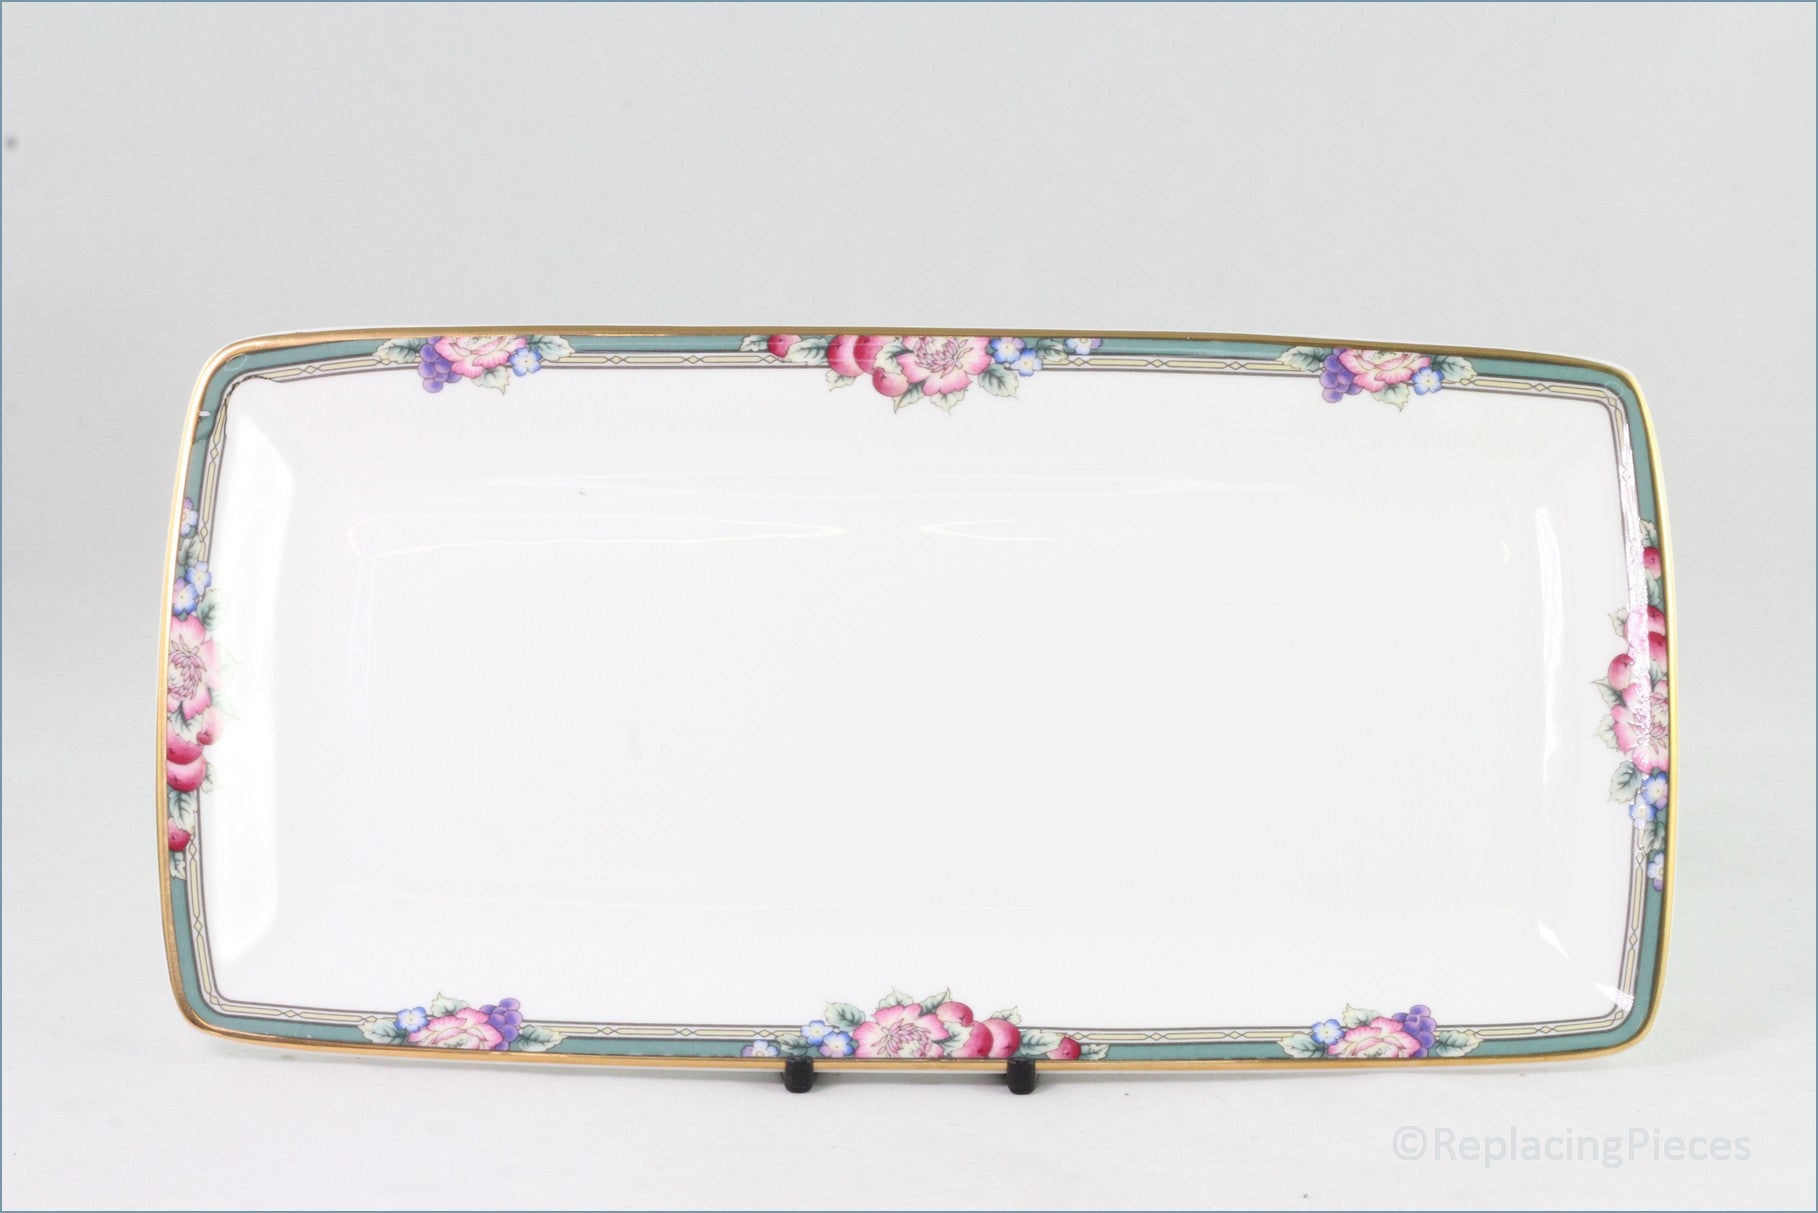 Royal Doulton - Orchard Hill (H5233) - Sandwich Tray